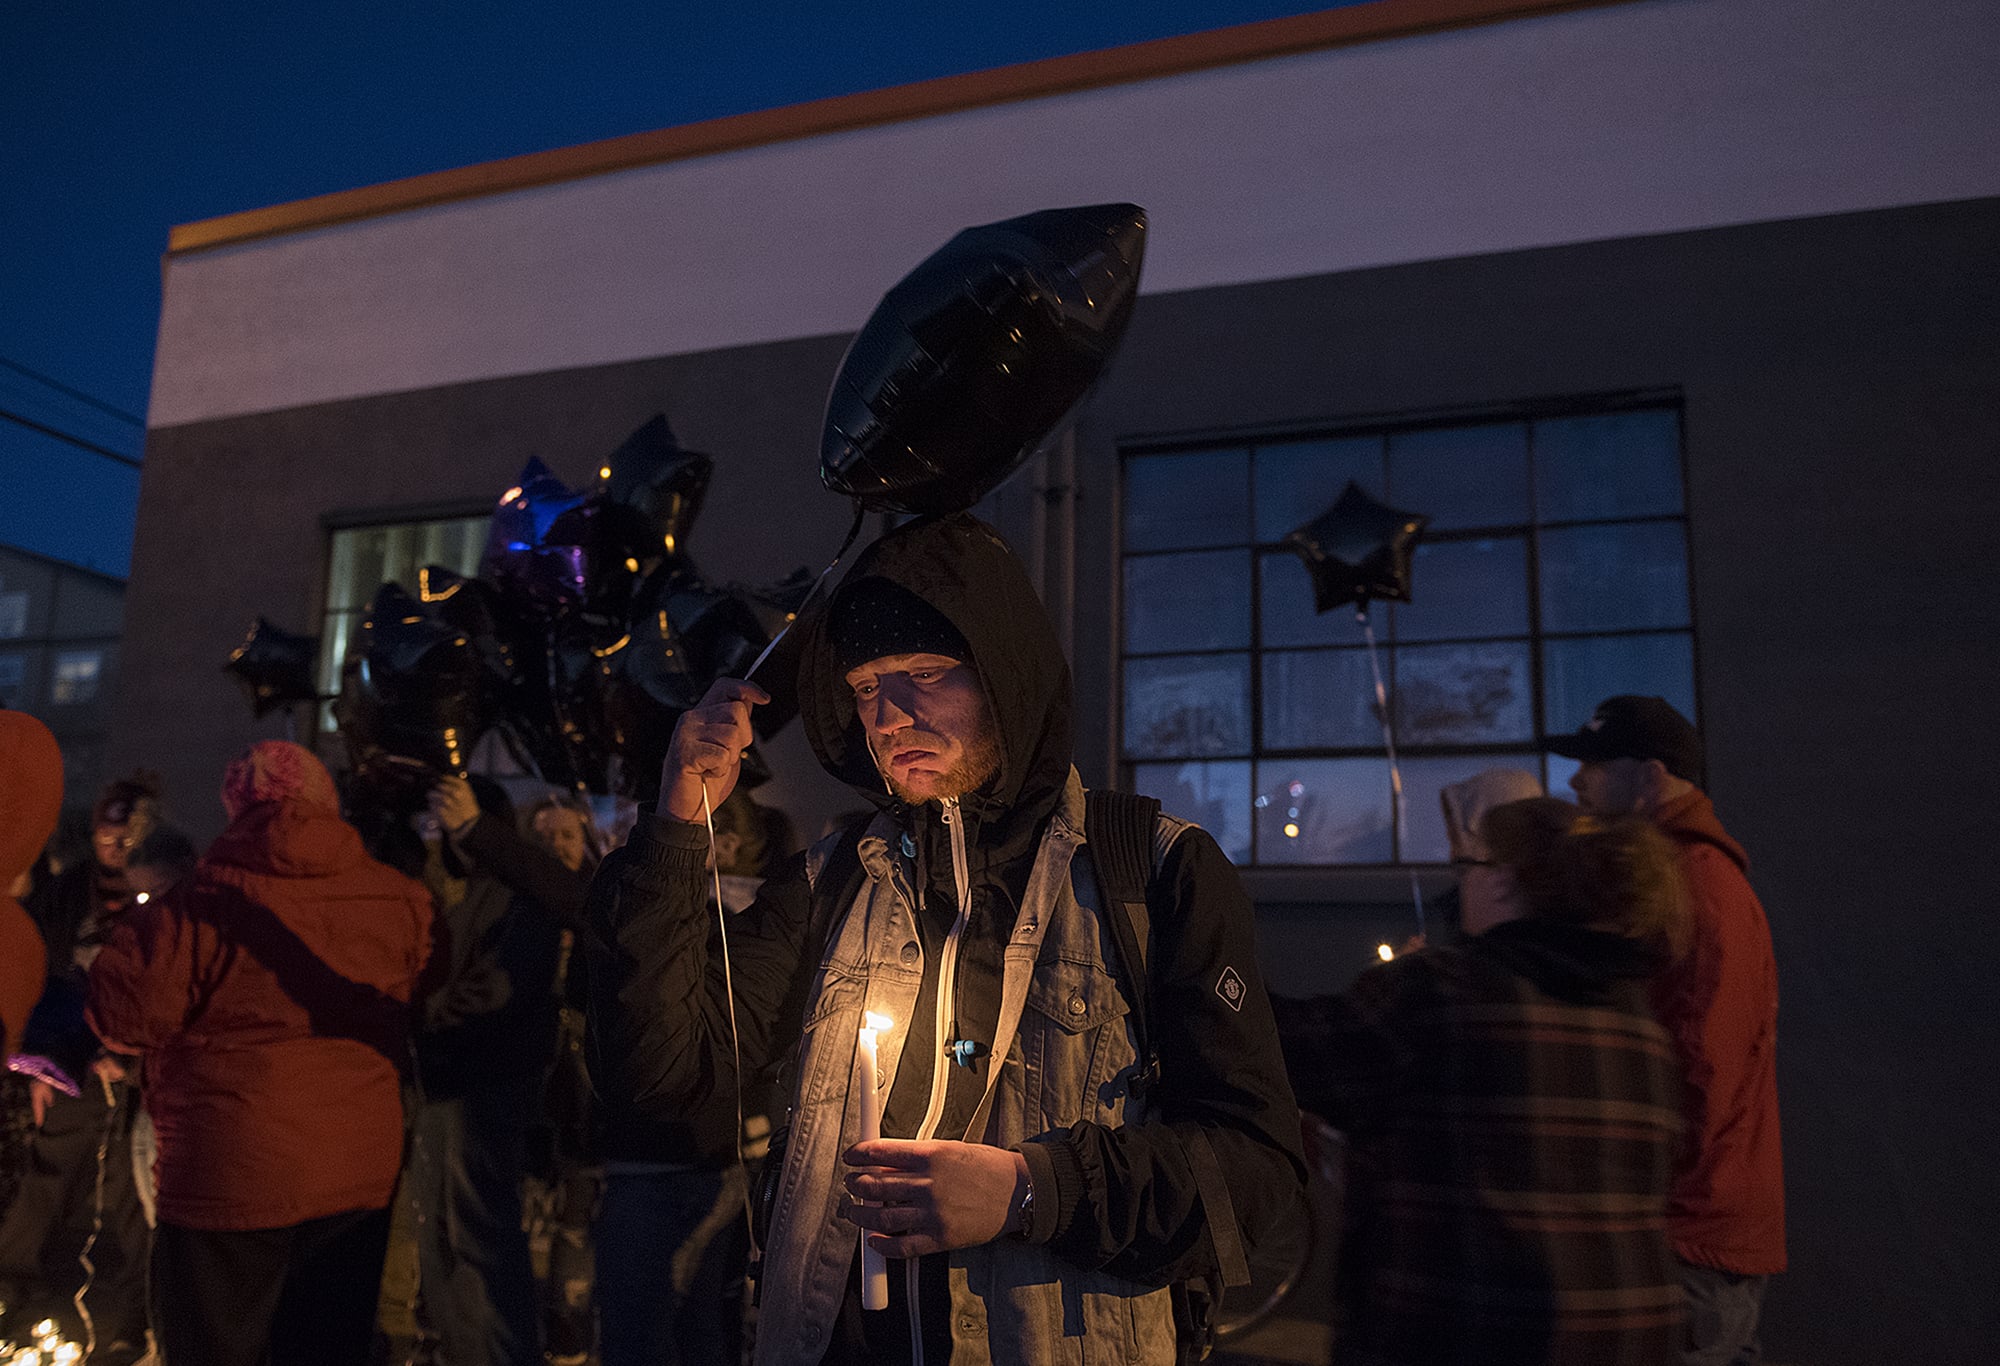 Gallery: Candlelight vigil for Michael Pierce